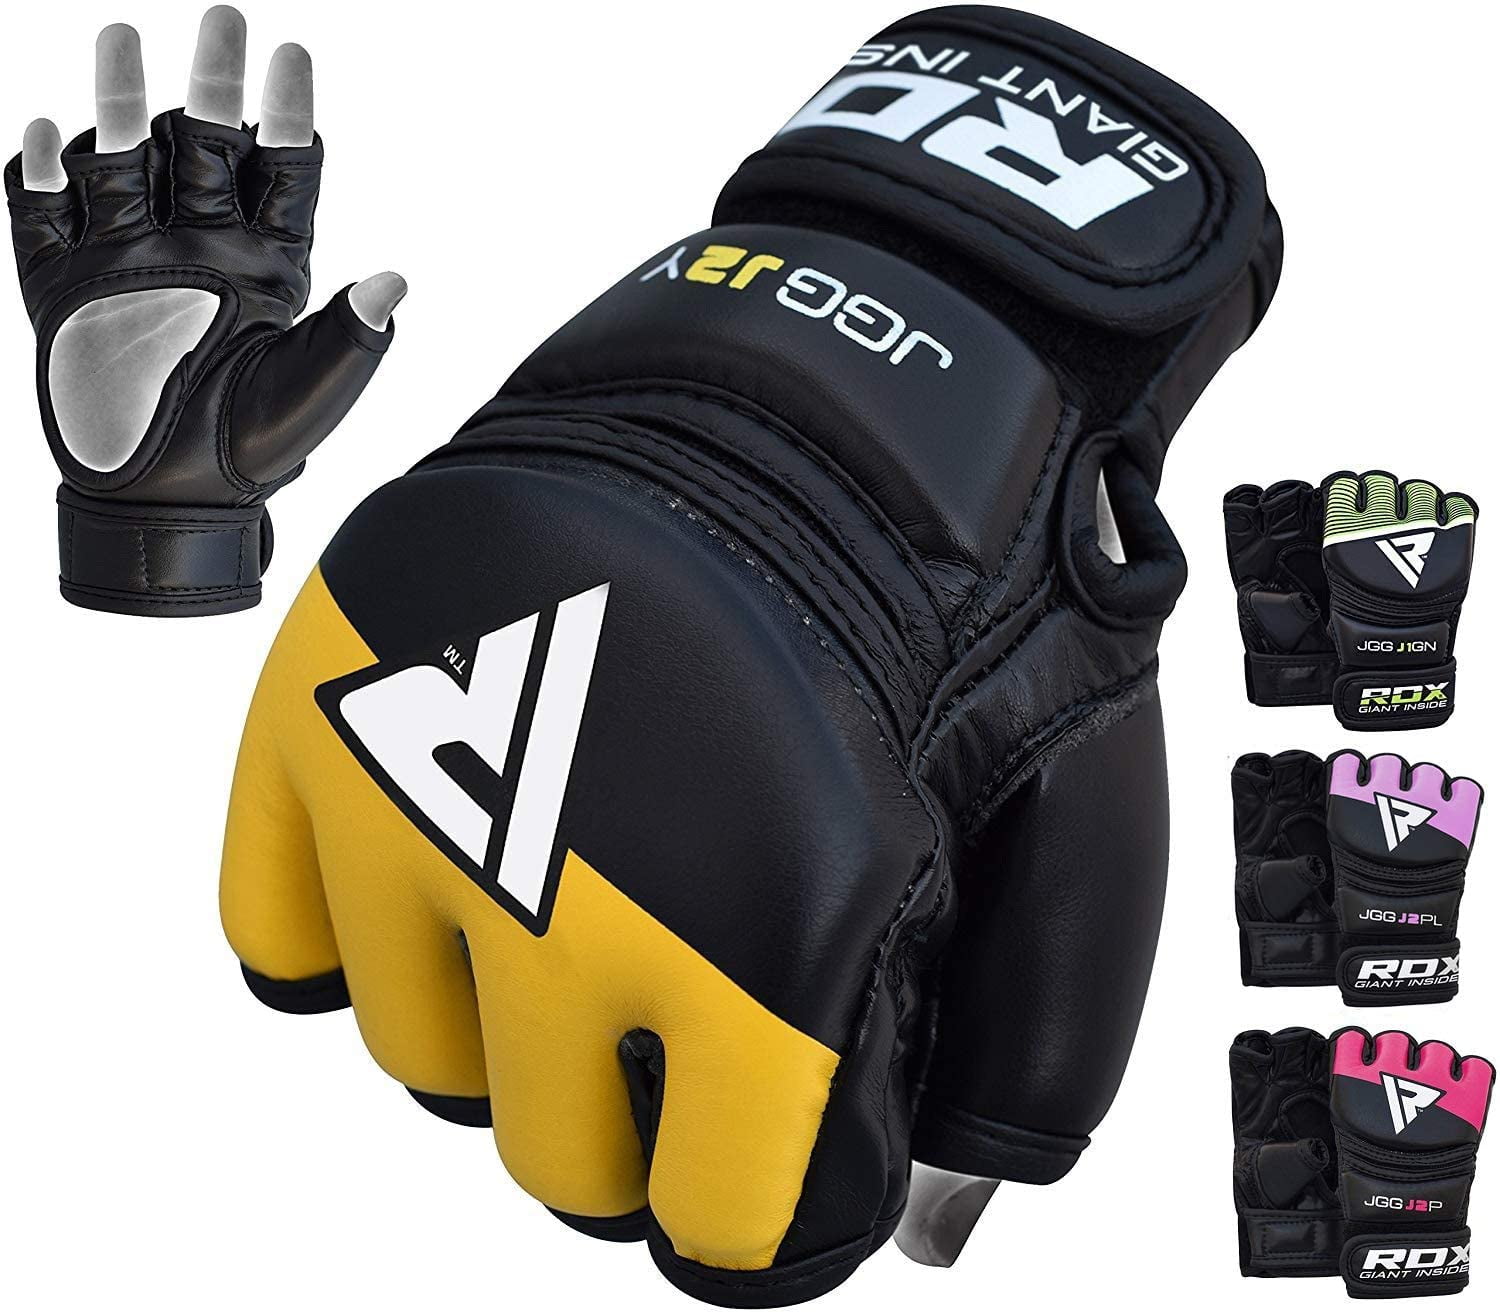 MRX Fight MMA Gloves UFC Cage Boxing Grappling Glove Snake Design Black/Yellow 